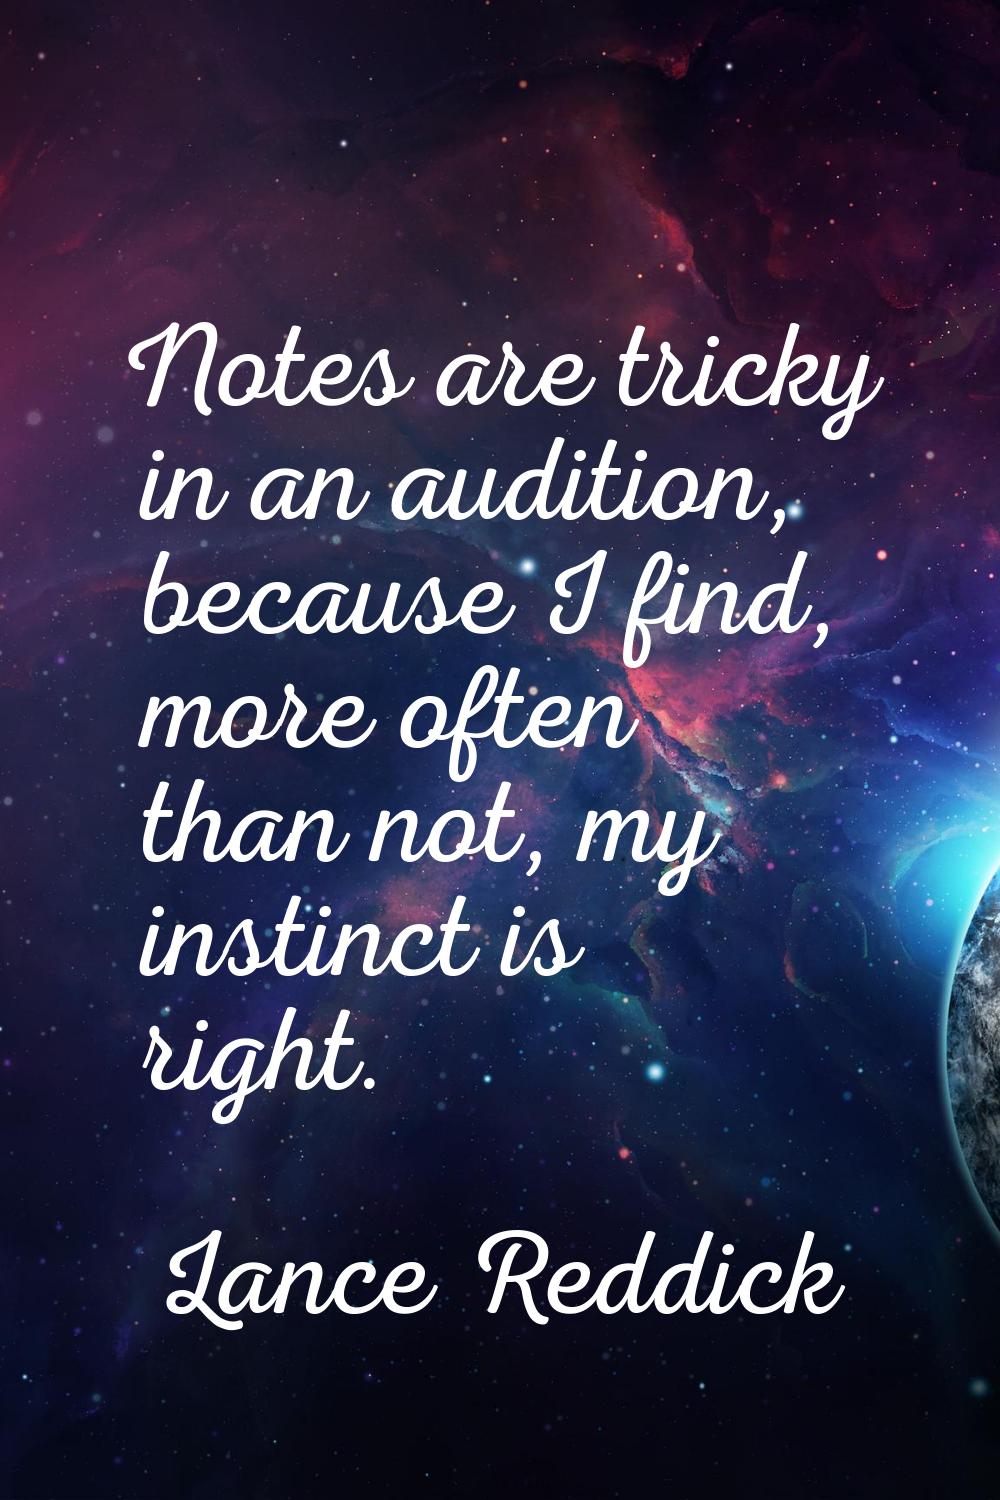 Notes are tricky in an audition, because I find, more often than not, my instinct is right.